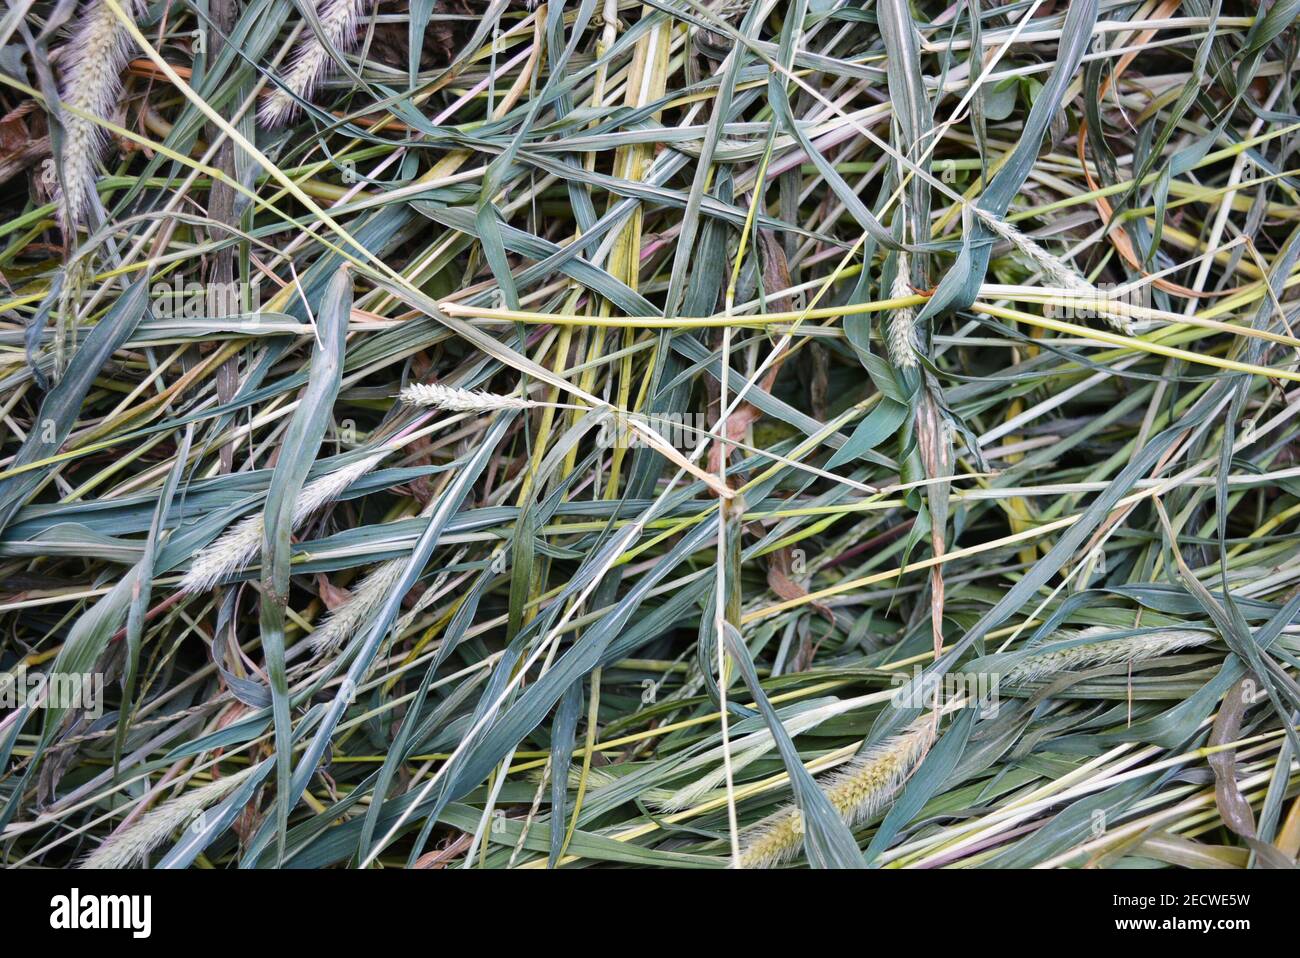 Green dried dry green grass, setaria, foxtail or bristle grasses. An unusual chaotic background of seeds and long leaves and a stem of herbs and weeds Stock Photo